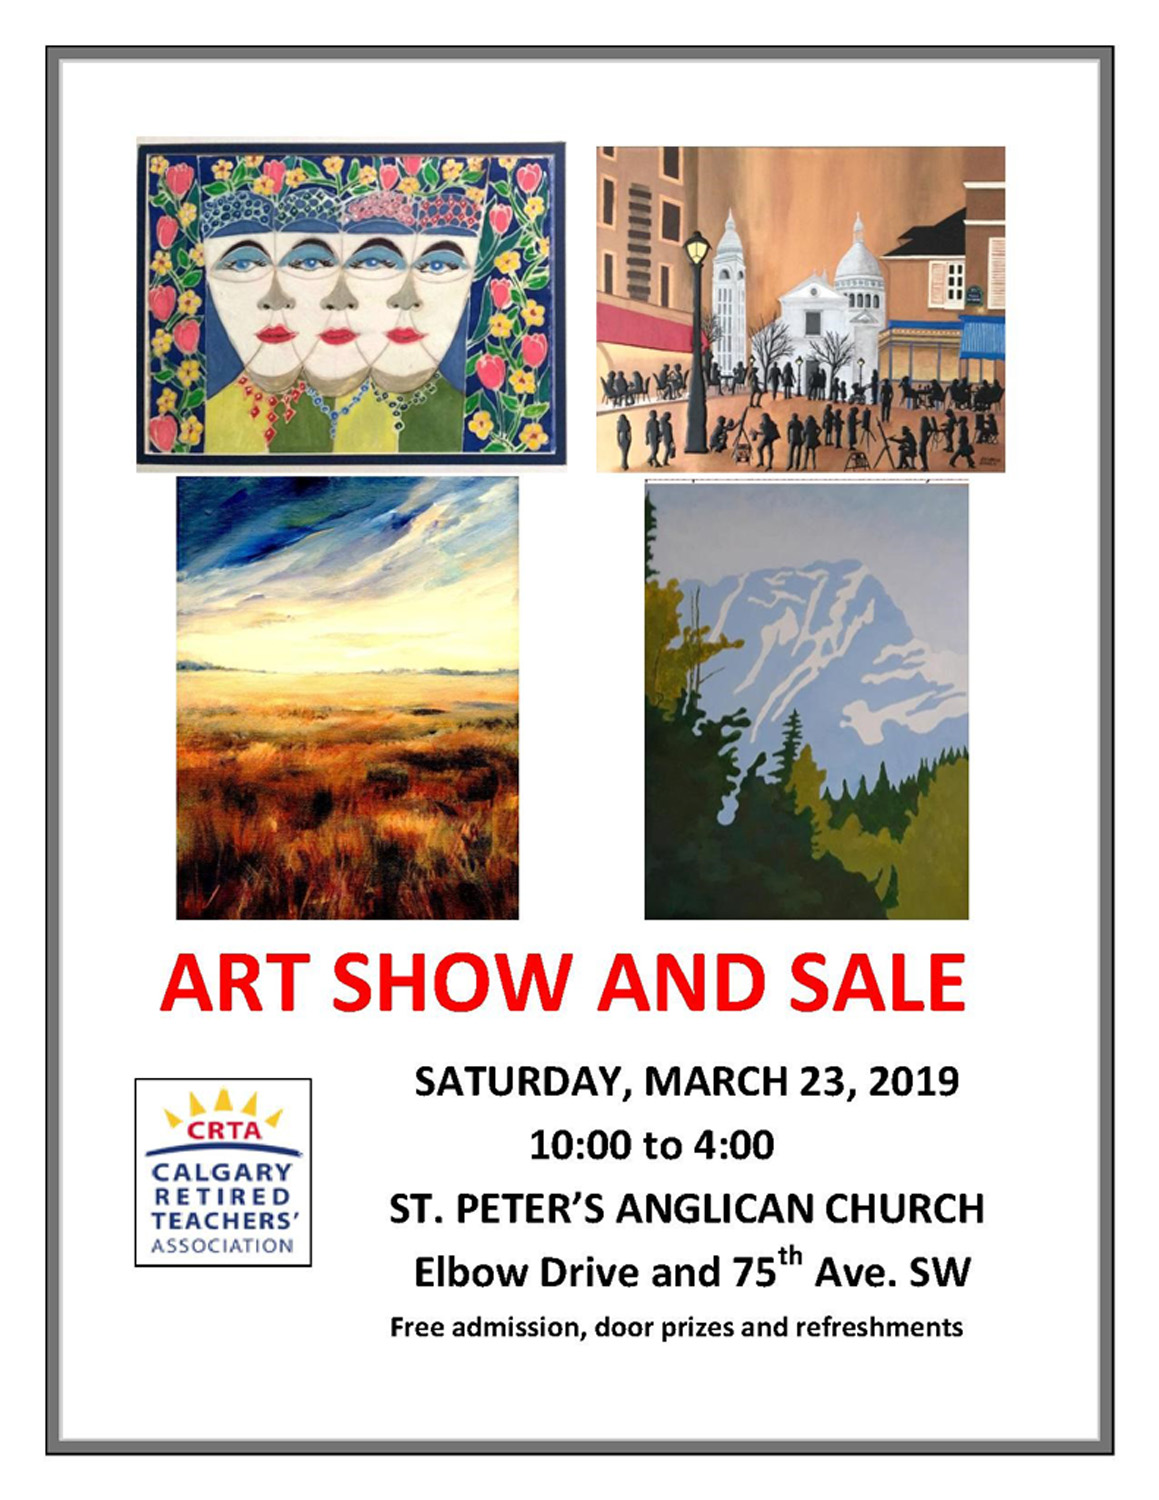 CRTA Art Show and Sale - image